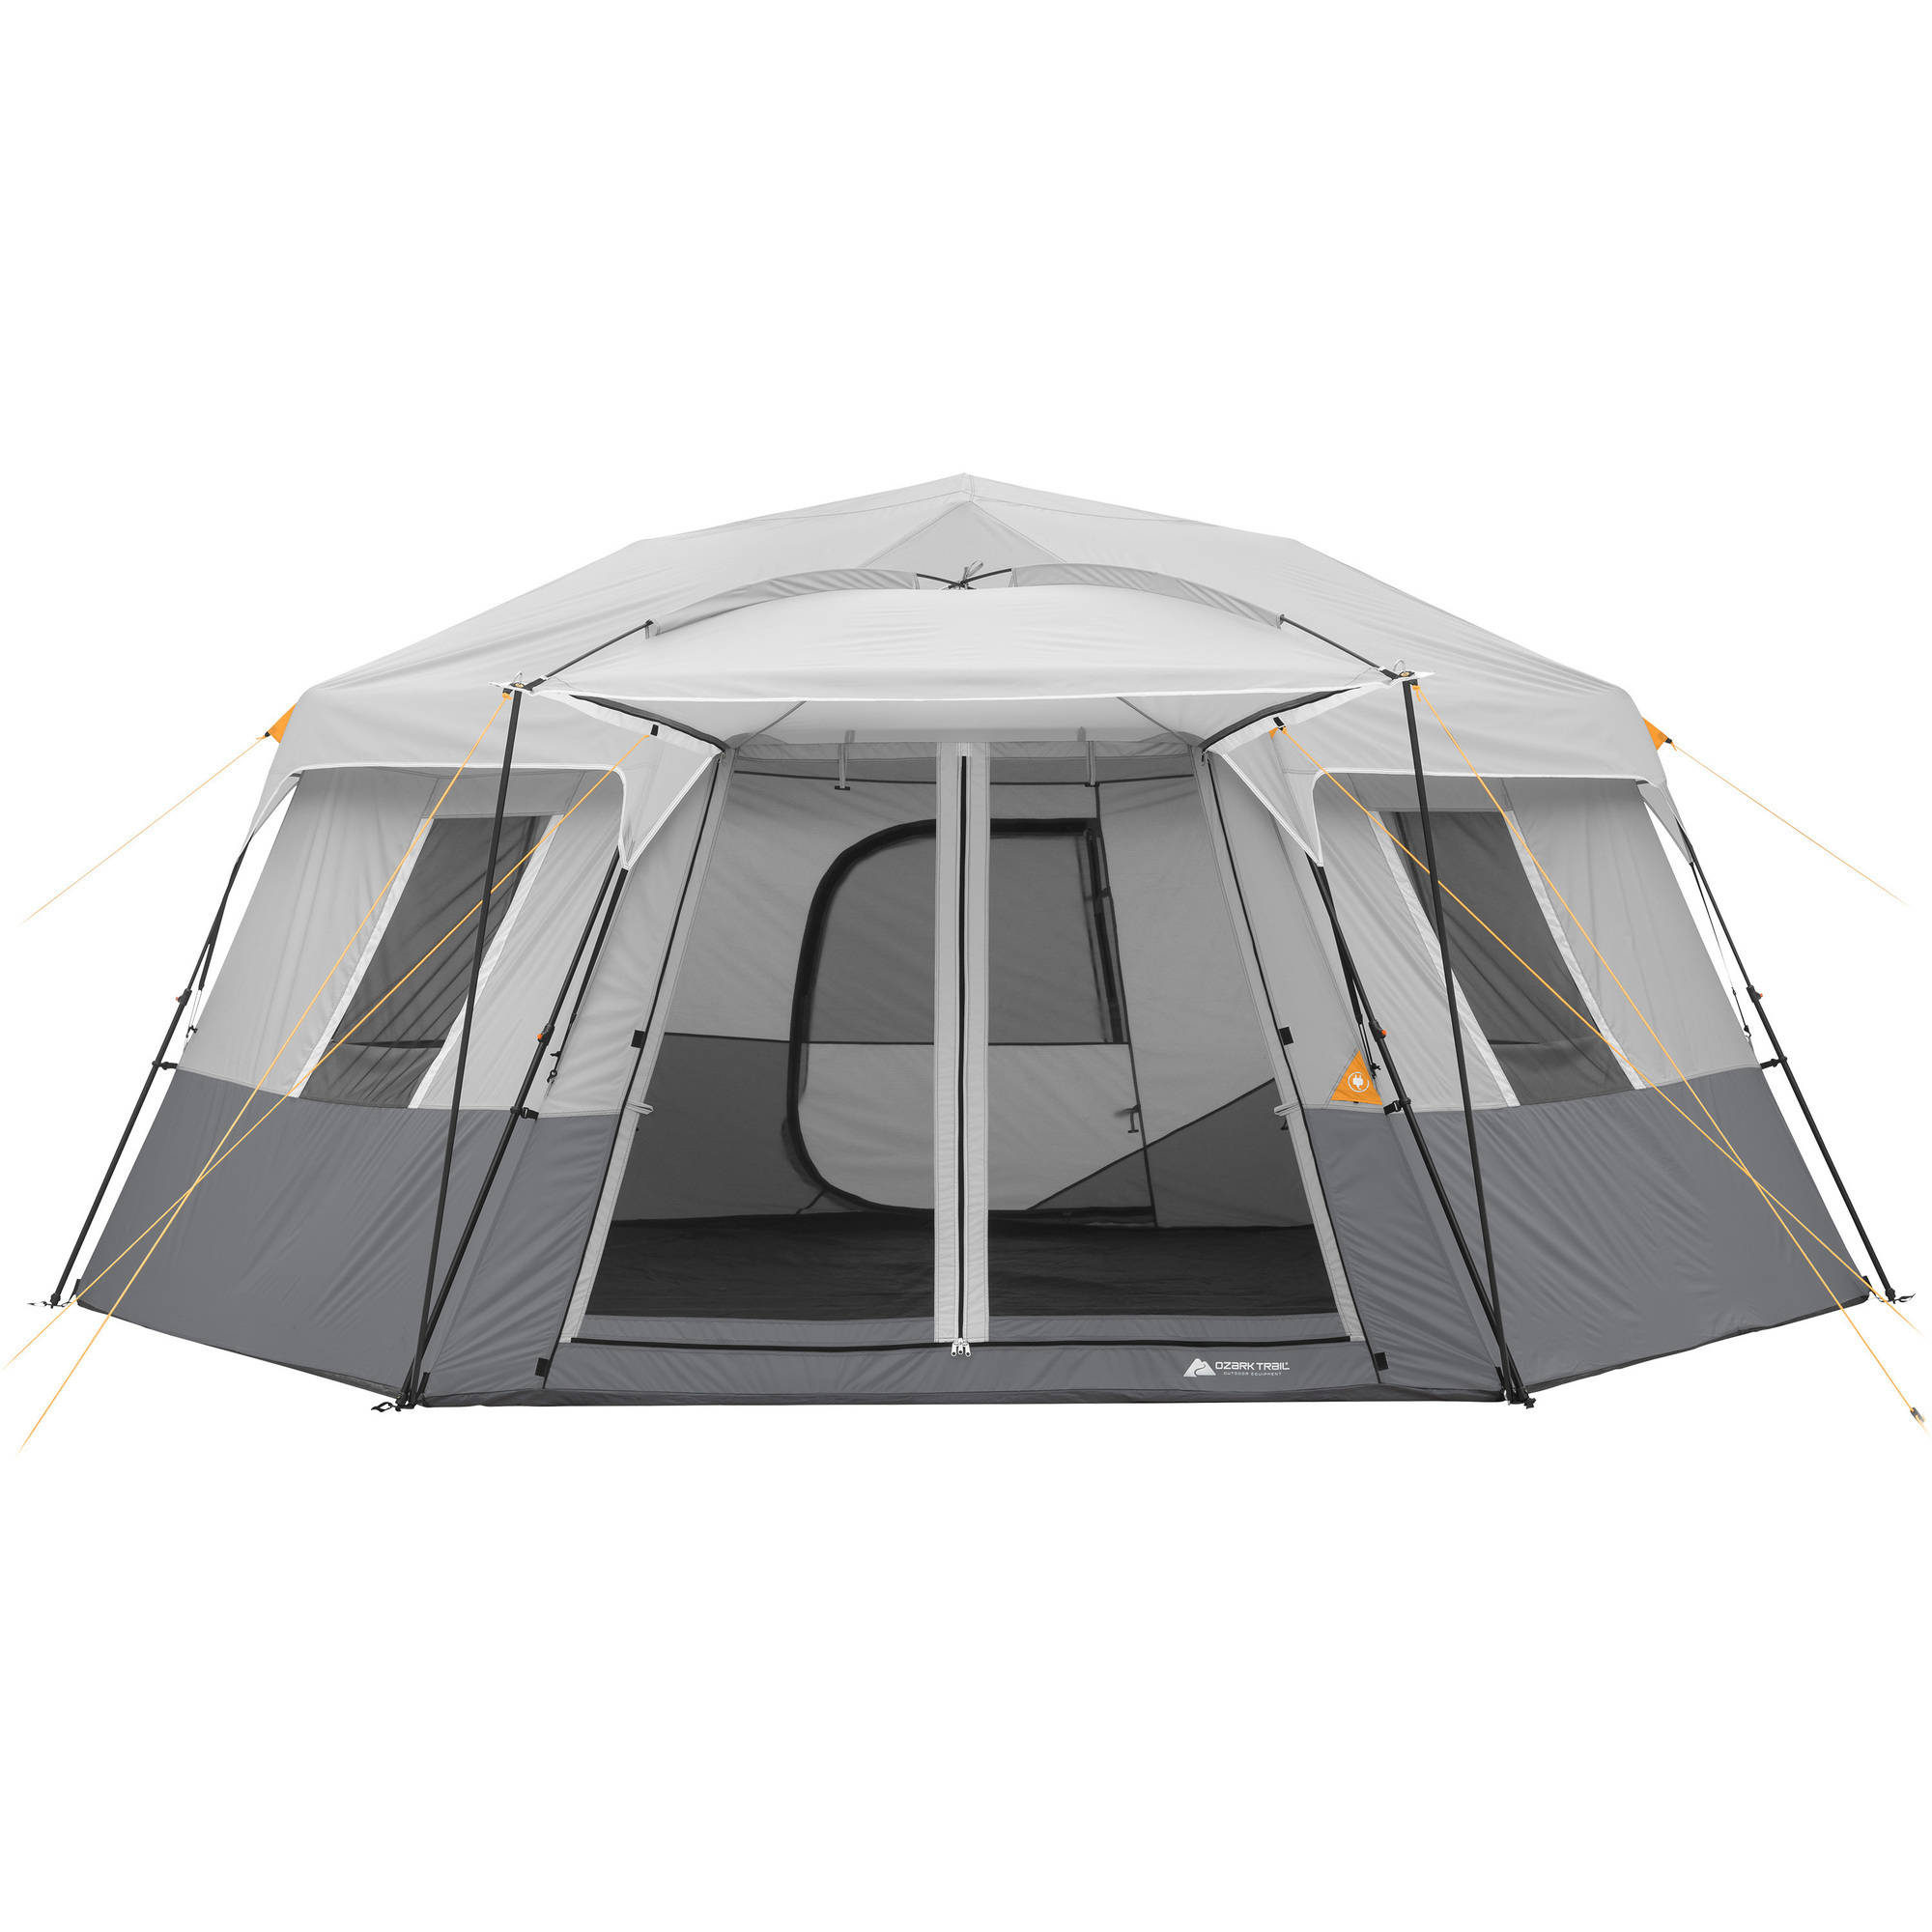 Ozark Trail 17' x 15' Person Instant Hexagon Cabin Tent, Sleeps 11 - image 1 of 15